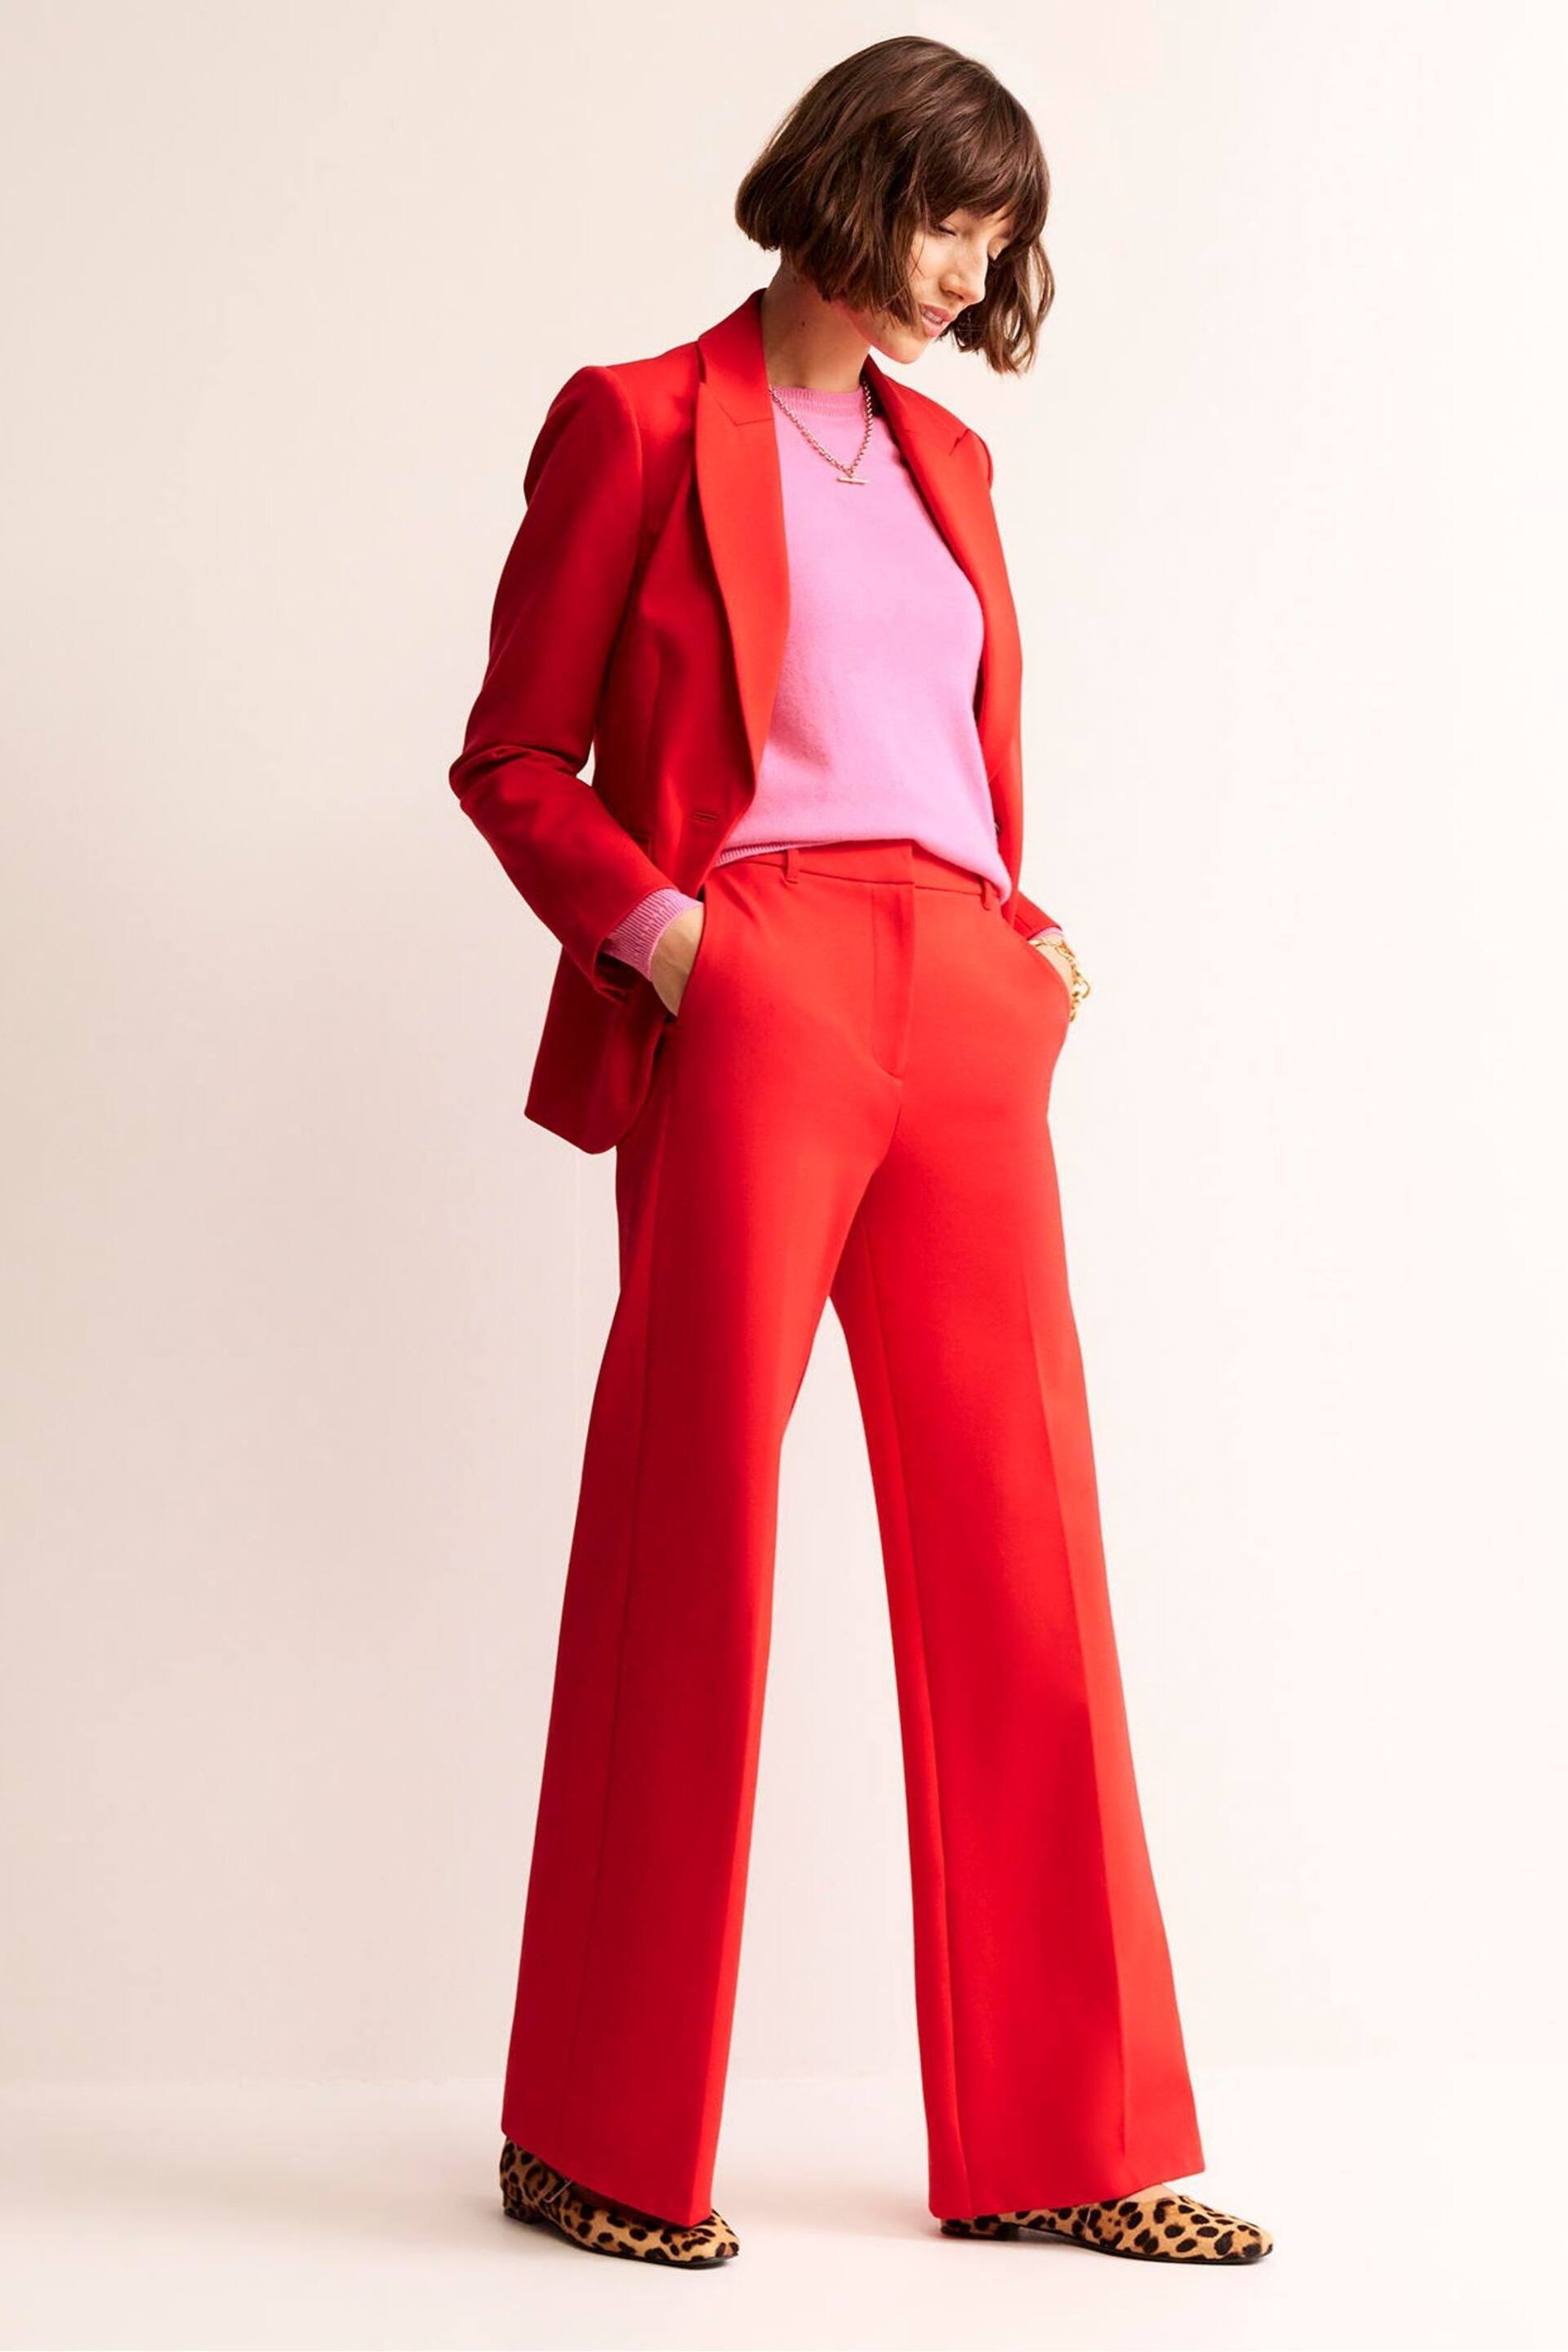 Boden Red Westbourne Ponte Trousers - Image 3 of 5